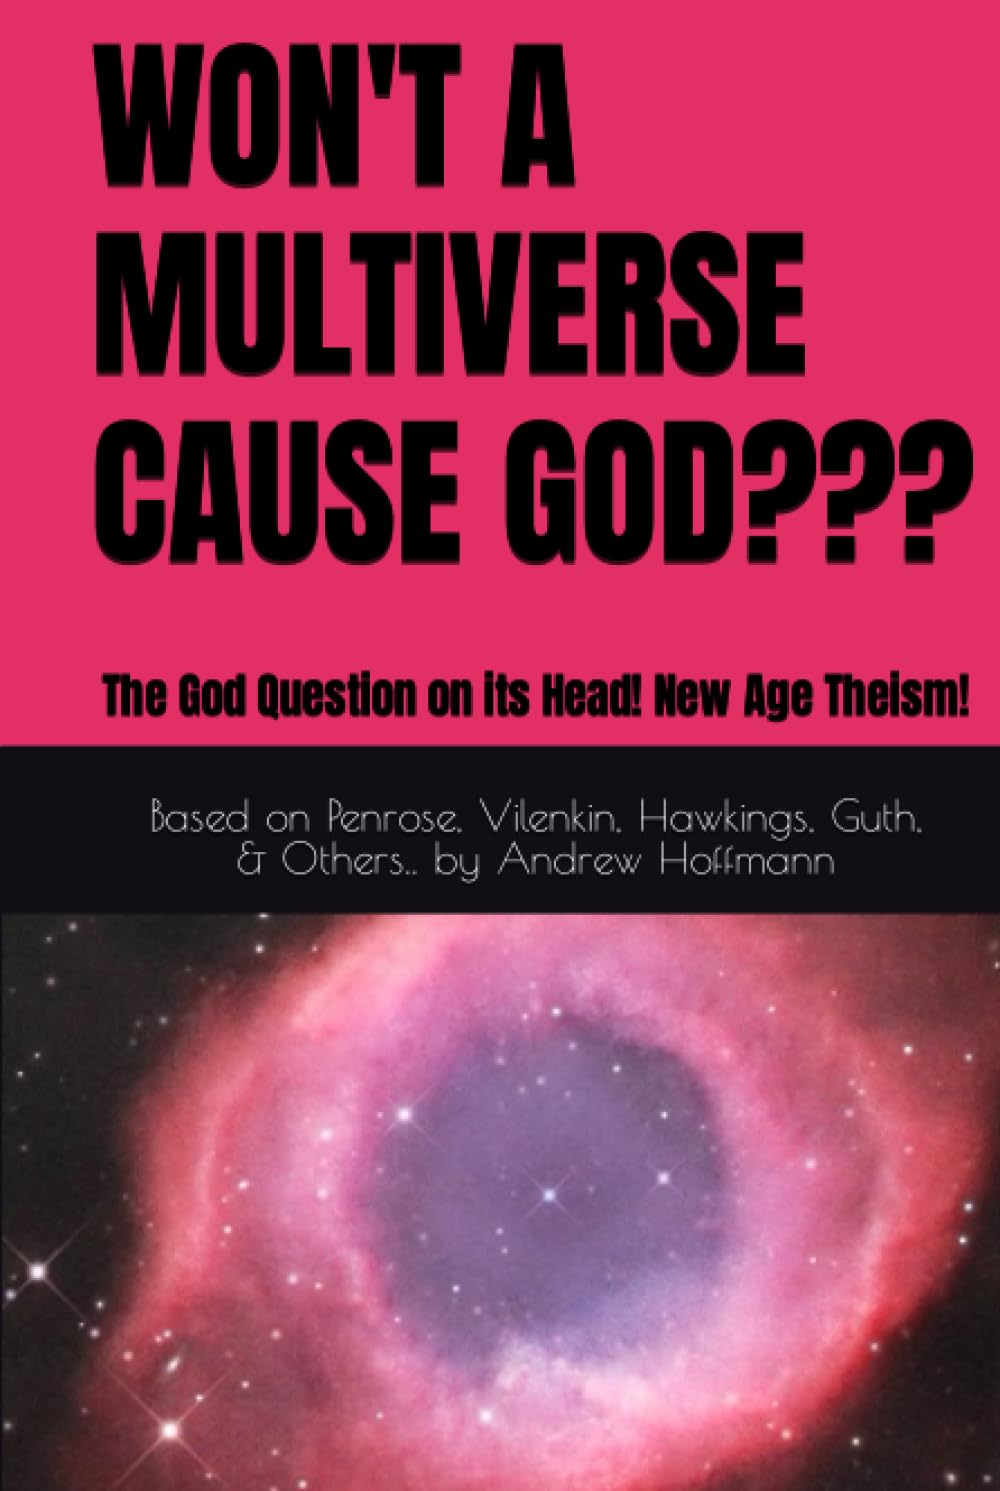 Does God Exist? WON'T A MULTIVERSE CAUSE GOD???: The God Question on its Head! New Age Theism!